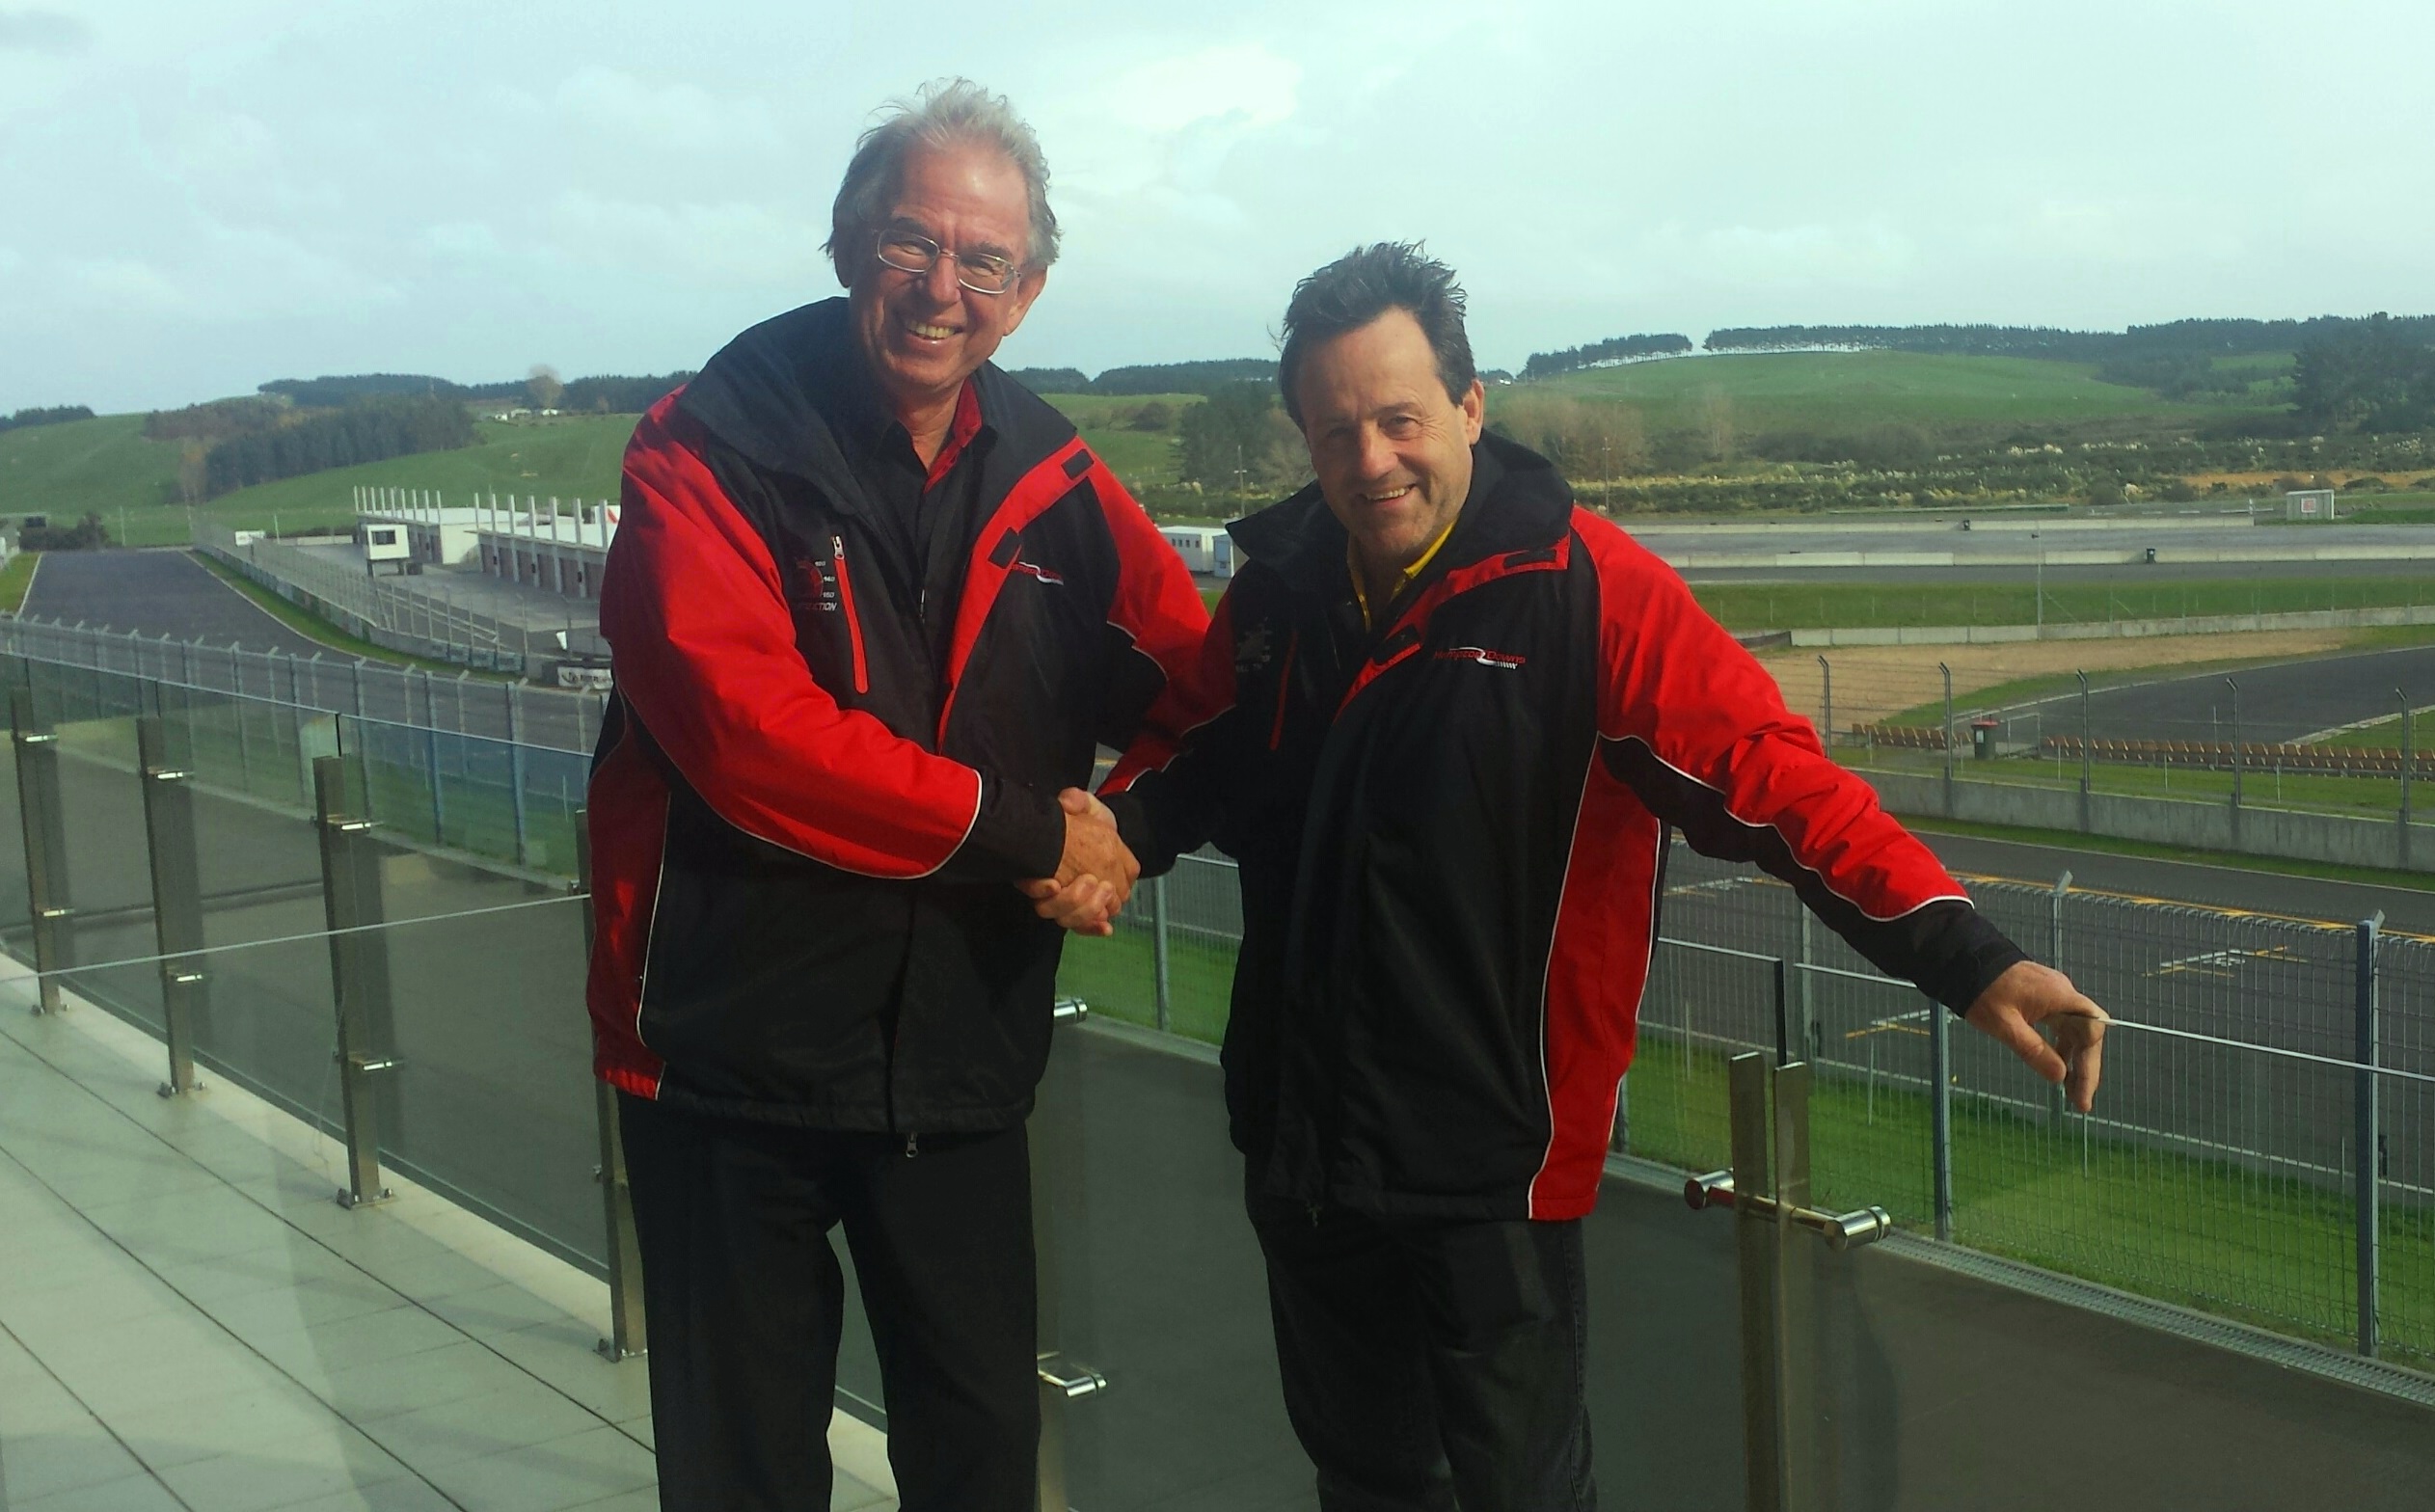 Done deal: Quinn excited for potential of Hampton Downs acquisition